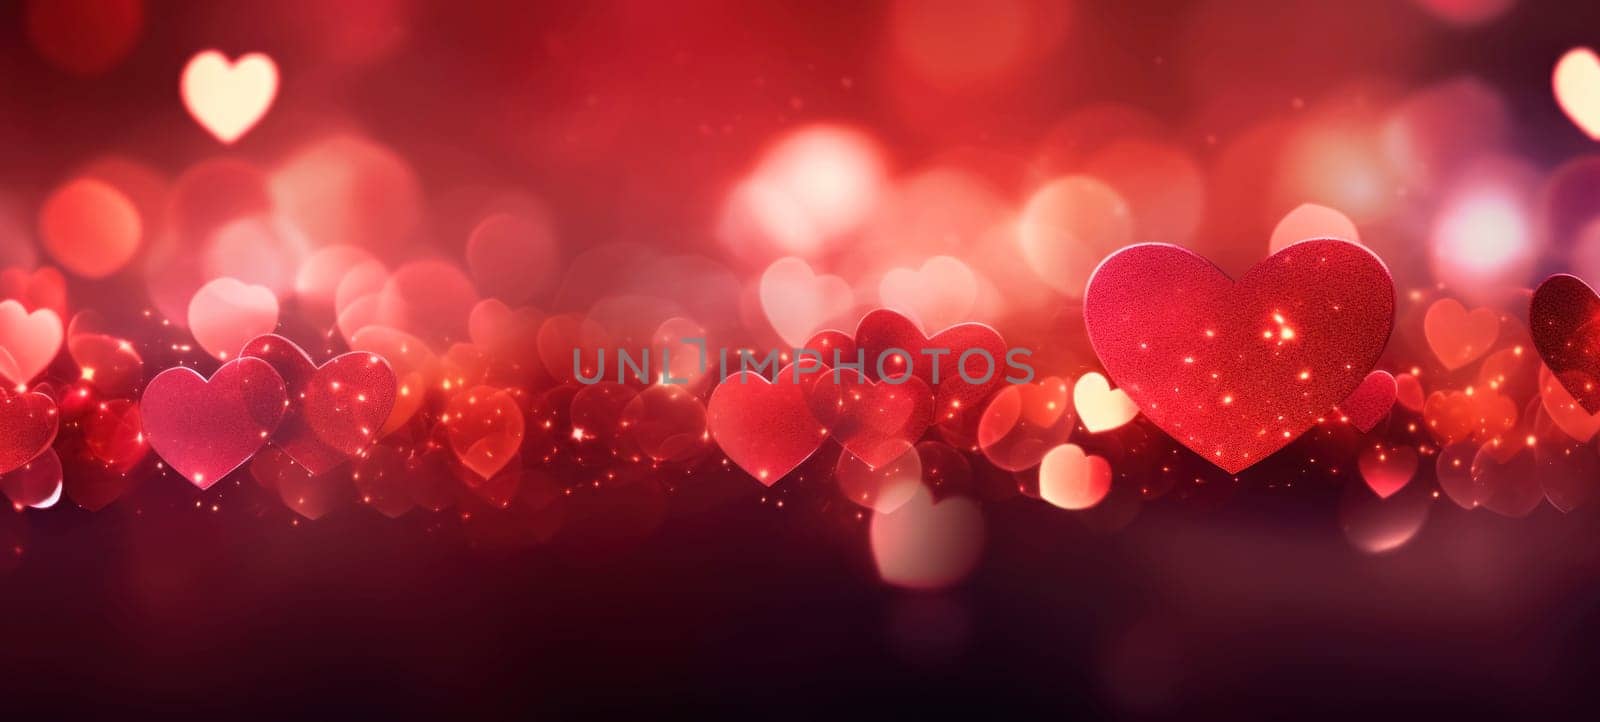 Red background with hearts for Valentine's Day. Abstract horizontal banner by andreyz